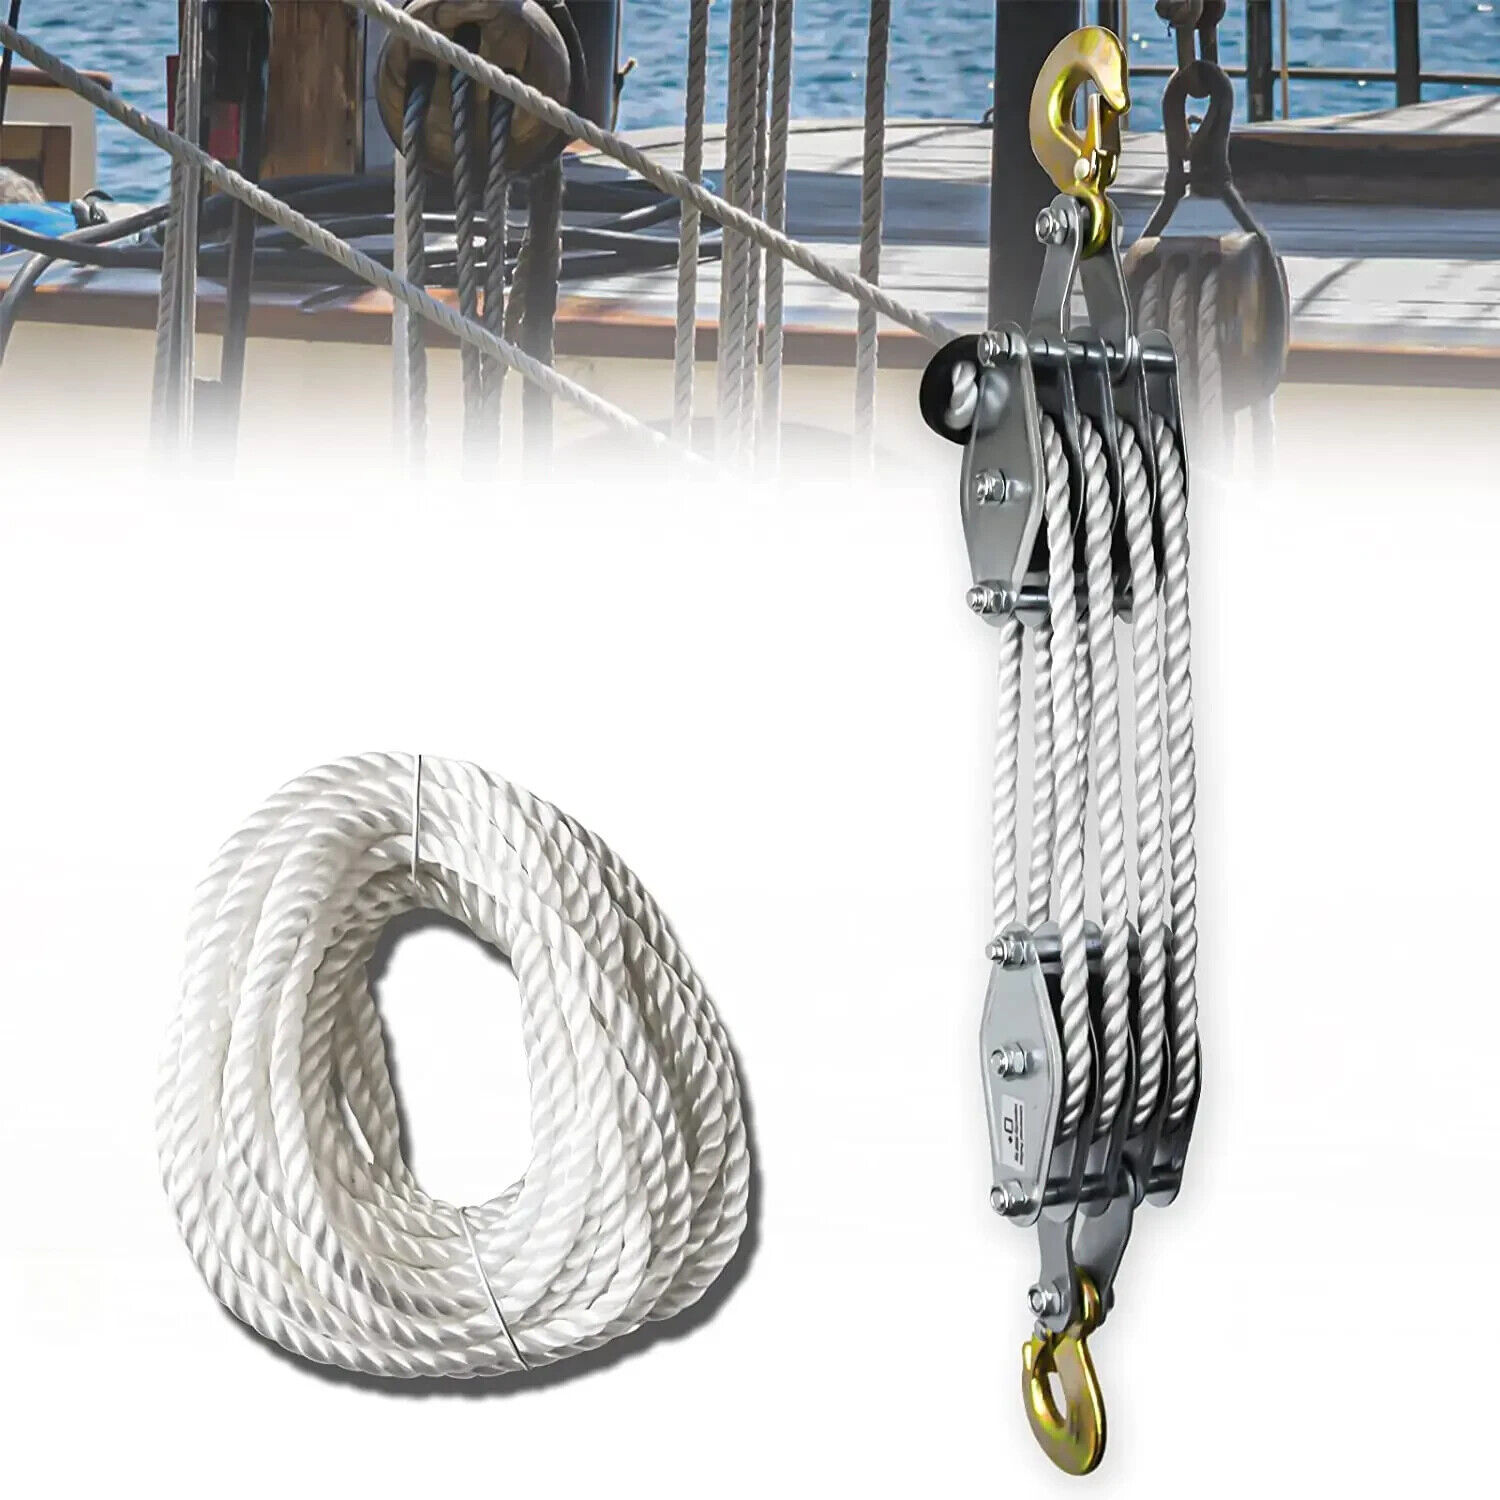 Heavy Duty Pulley-Block and Tackle,2200 Lbs Capacity, 4400 Lbs Breaking Strength